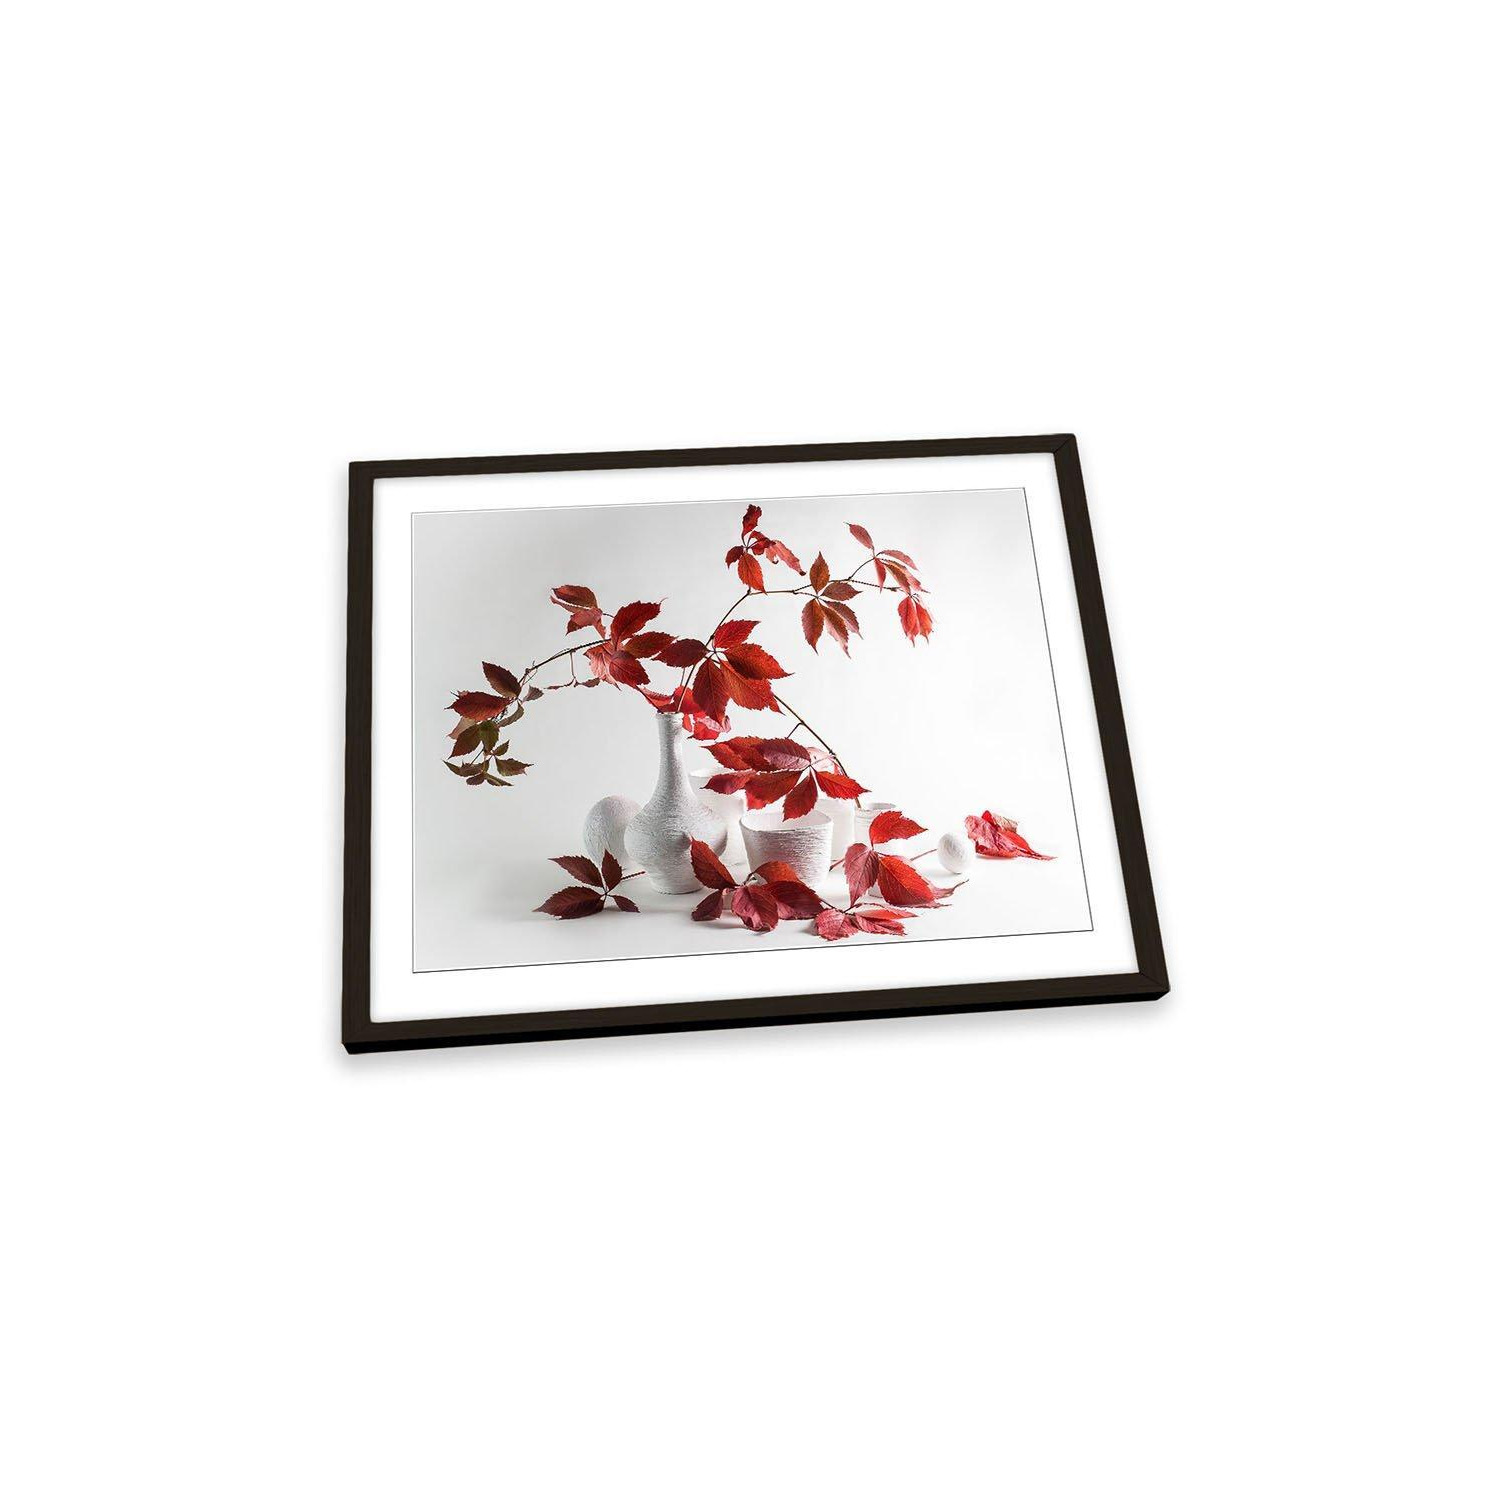 Red and White Leaves Vase Floral Framed Art Print Picture Wall Artwork - (W)47cm x (H)35cm - image 1